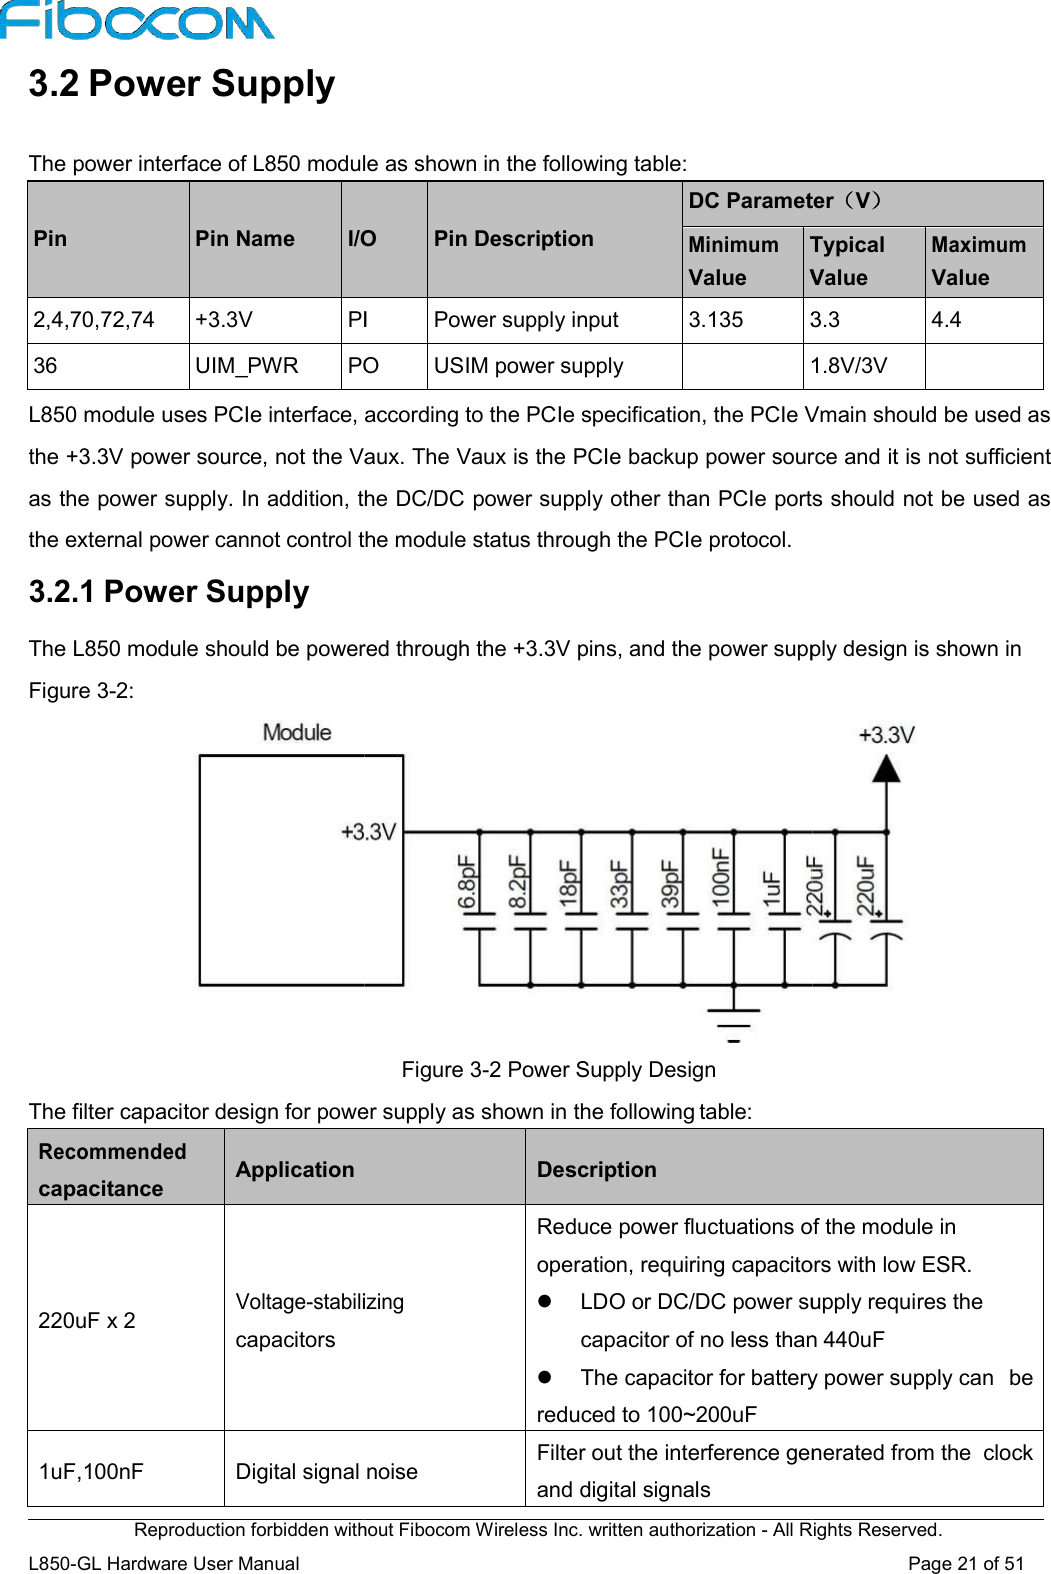 Reproduction forbidden without Fibocom Wireless Inc. written authorization L850-GL Hardware User Manual    3.2 Power Supply  The power interface of L850 module as shown in the following table: Pin  Pin Name  I/O2,4,70,72,74  +3.3V PI36  UIM_PWR POL850 module uses PCIe interface, according to the PCIe specification, the PCIe Vmain should be used as the +3.3V power source, not the Vaux. The Vaux is the PCIe backup power source andas the power supply. In addition, the DC/DC power supply other than PCIe ports should not be used as the external power cannot control the module status through the PCIe protocol.3.2.1 Power Supply The L850 module should be powered throughFigure 3-2: The filter capacitor design for power supply as shown in the followingRecommended capacitance  Application     220uF x 2    Voltage-stabilizing capacitors  1uF,100nF  Digital signal noiseReproduction forbidden without Fibocom Wireless Inc. written authorization - All Rights Reserved.The power interface of L850 module as shown in the following table: I/O  Pin Description DC ParameterMinimum Value TypicalValuePI  Power supply input  3.135 3.3PO  USIM power supply   1.8V/3VL850 module uses PCIe interface, according to the PCIe specification, the PCIe Vmain should be used as the +3.3V power source, not the Vaux. The Vaux is the PCIe backup power source andas the power supply. In addition, the DC/DC power supply other than PCIe ports should not be used as the external power cannot control the module status through the PCIe protocol. The L850 module should be powered through the +3.3V pins, and the power supply design is shown in Figure 3-2 Power Supply Design The filter capacitor design for power supply as shown in the following table:   Description stabilizing Reduce power fluctuations of the module in operation, requiring capacitors with  LDO or DC/DC power supply requires the capacitor of no less than The capacitor for battery power supply can reduced to 100~200uF Digital signal noise Filter out the interference generated from the  clockand digital signals All Rights Reserved. Page 21 of 51 DC Parameter（V） Typical Value Maximum Value 3.3  4.4 1.8V/3V  L850 module uses PCIe interface, according to the PCIe specification, the PCIe Vmain should be used as the +3.3V power source, not the Vaux. The Vaux is the PCIe backup power source and it is not sufficient as the power supply. In addition, the DC/DC power supply other than PCIe ports should not be used as the +3.3V pins, and the power supply design is shown in  Reduce power fluctuations of the module in operation, requiring capacitors with low ESR. LDO or DC/DC power supply requires the capacitor of no less than 440uF The capacitor for battery power supply can  be Filter out the interference generated from the  clock 